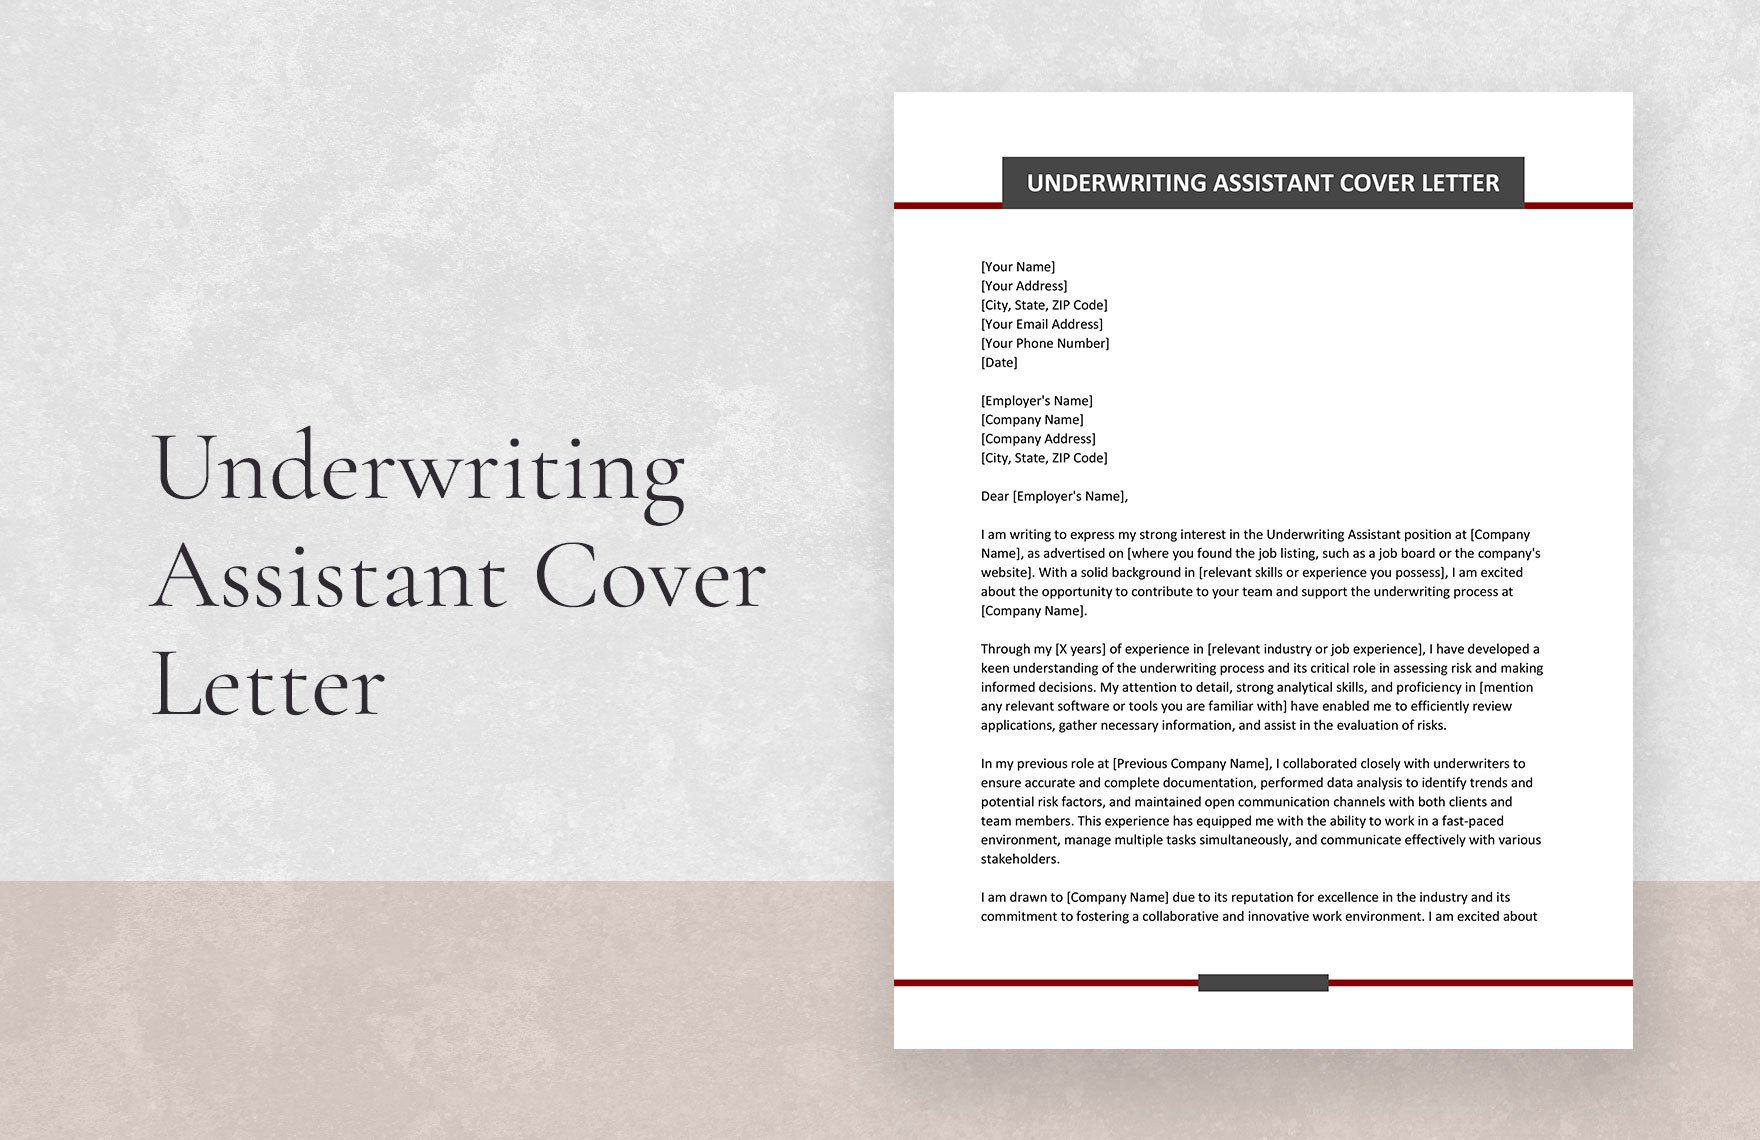 Underwriting Assistant Cover Letter